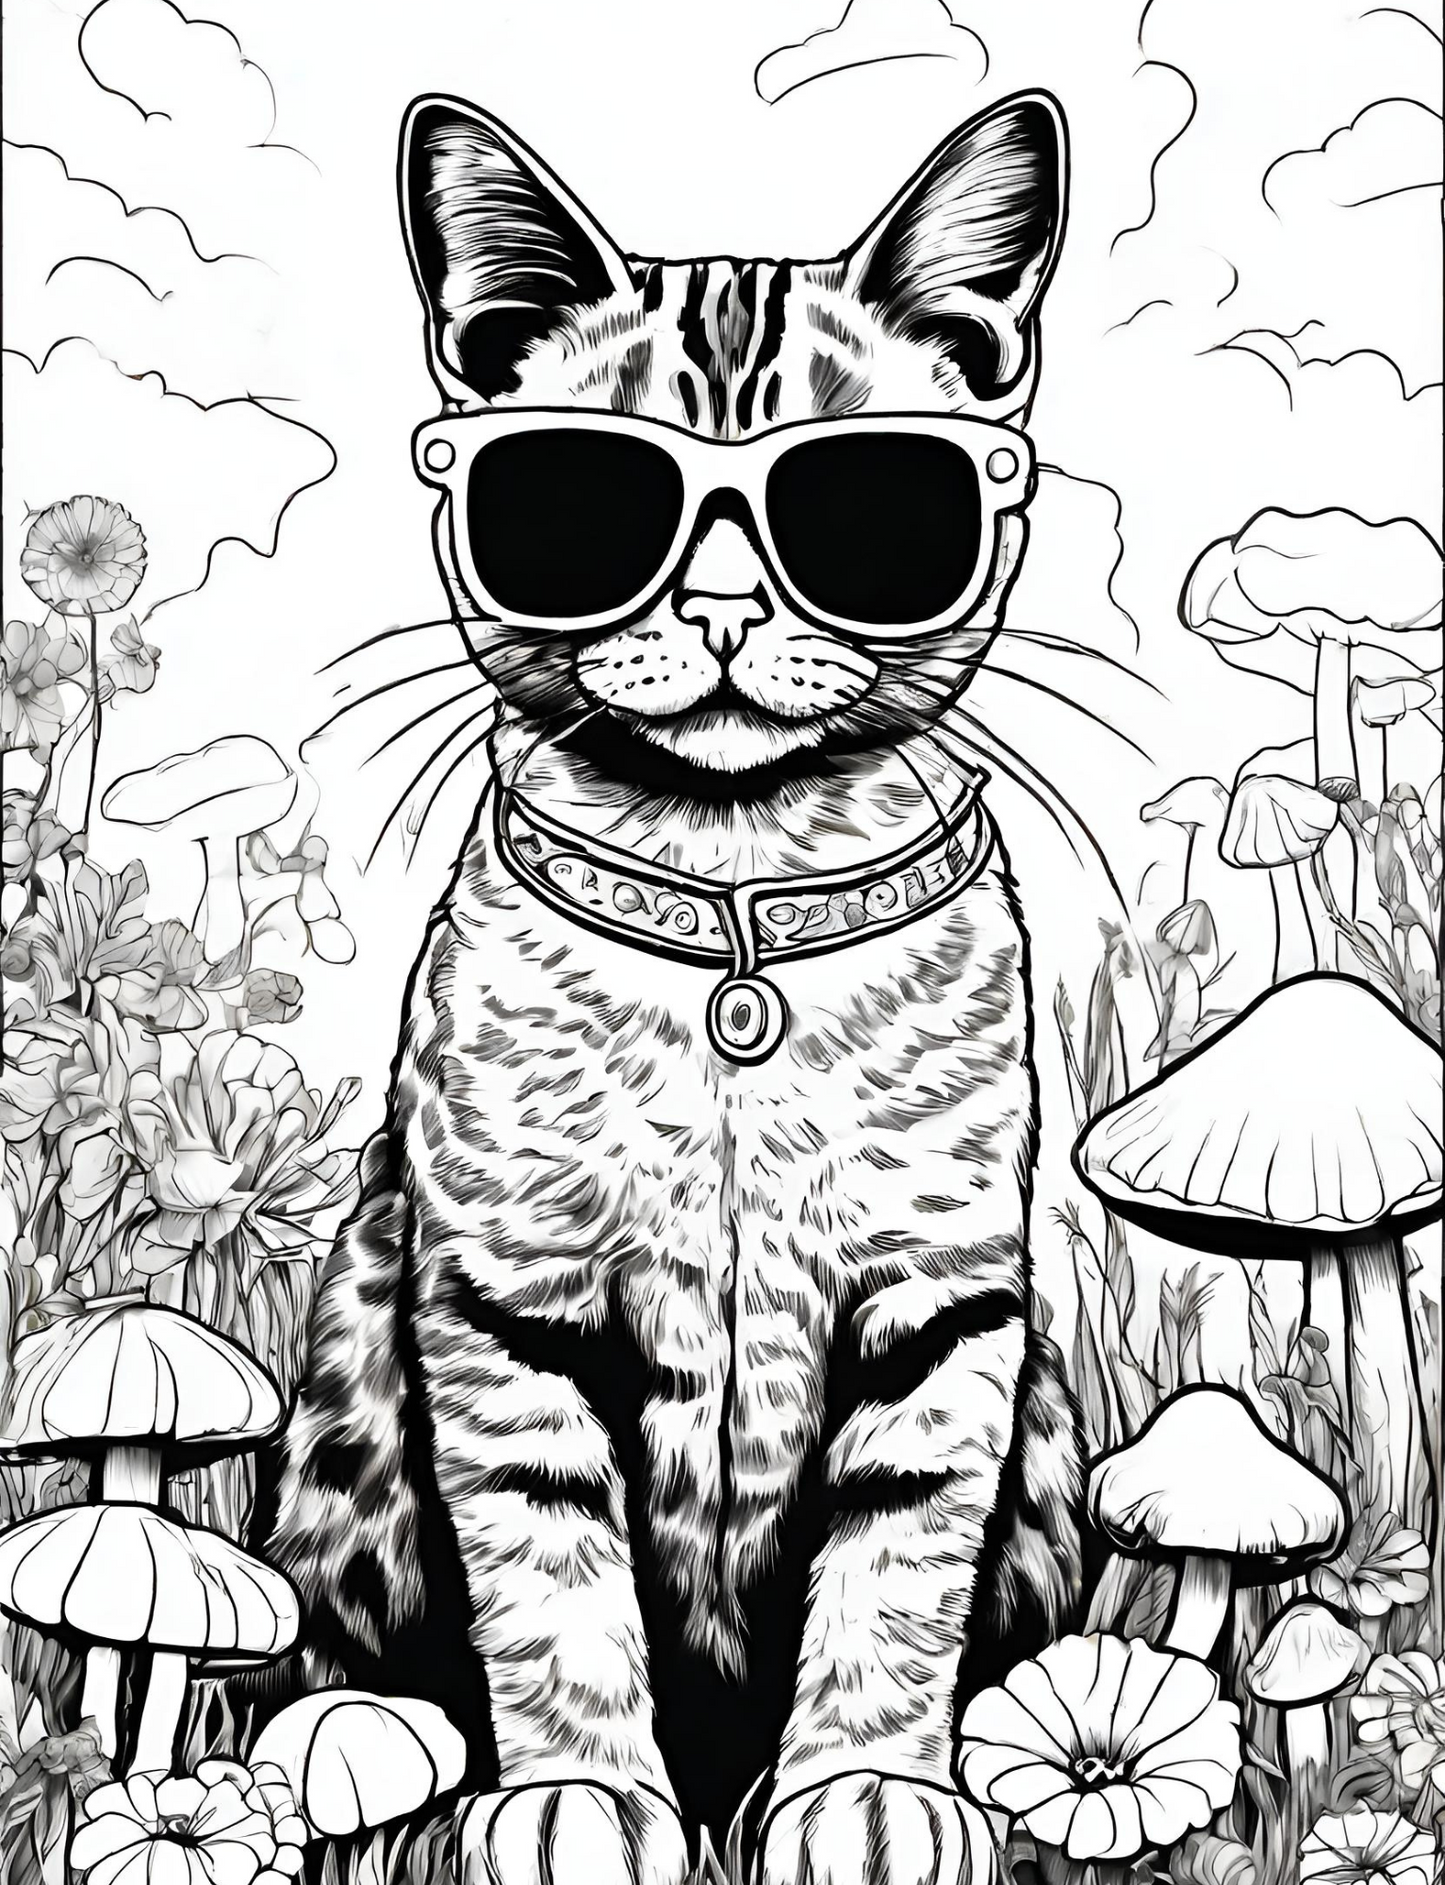 Sticky the Kitty - Psychedelic Coloring Book!